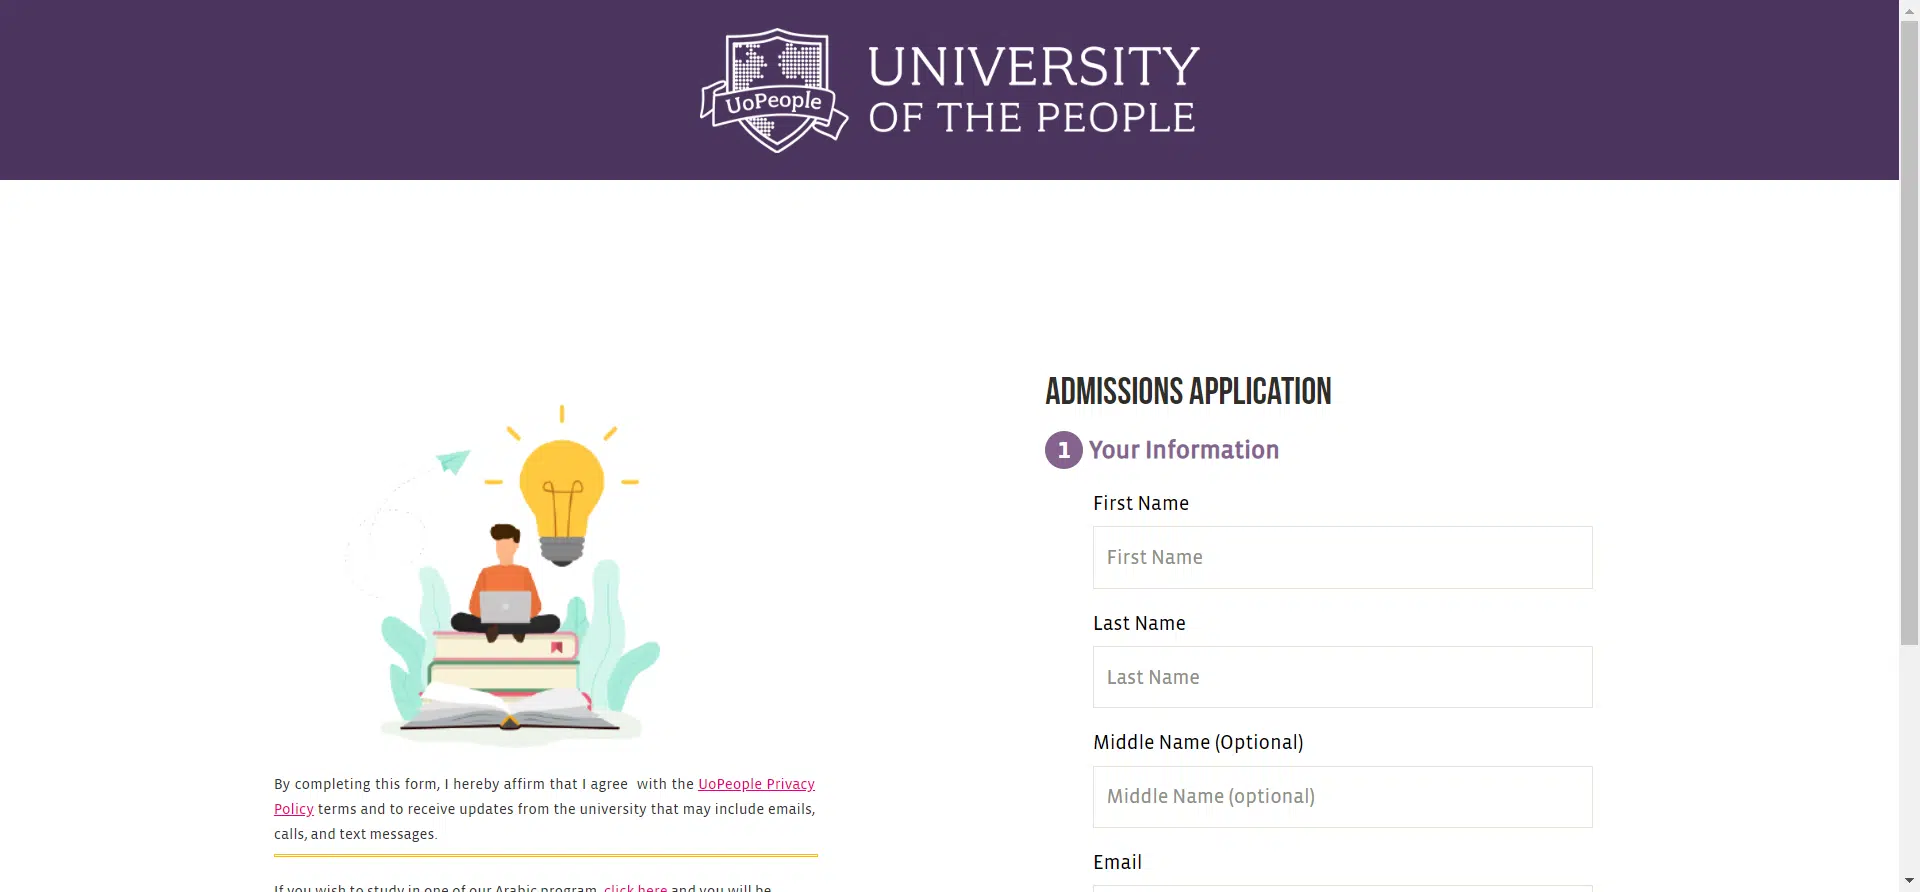 University of the people admission application image